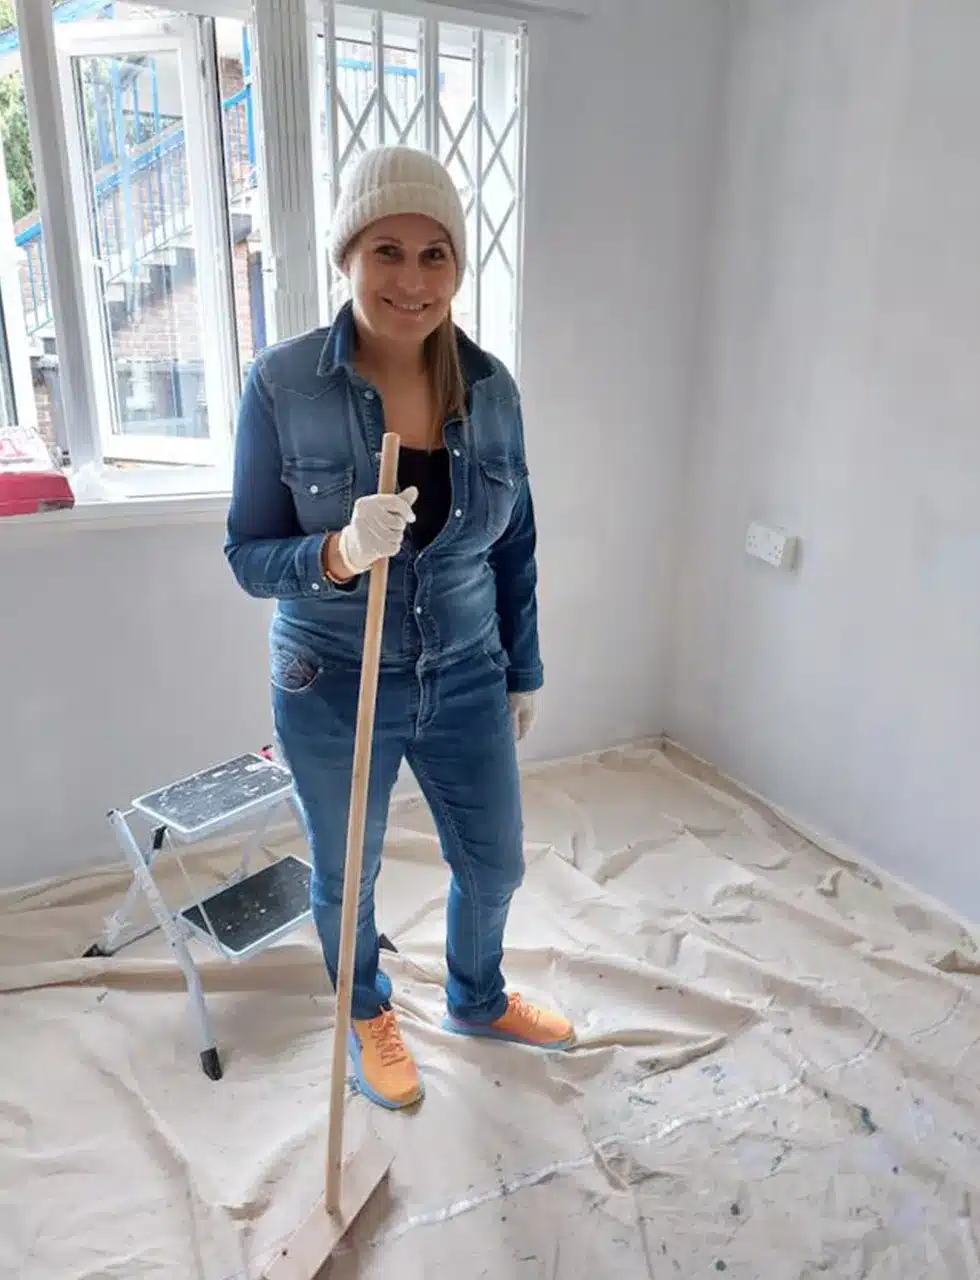 KP working on child's room designed by Katharine Pooleys interior design team, as part of charity project Decorate a Childs Life by The Childhood Trust